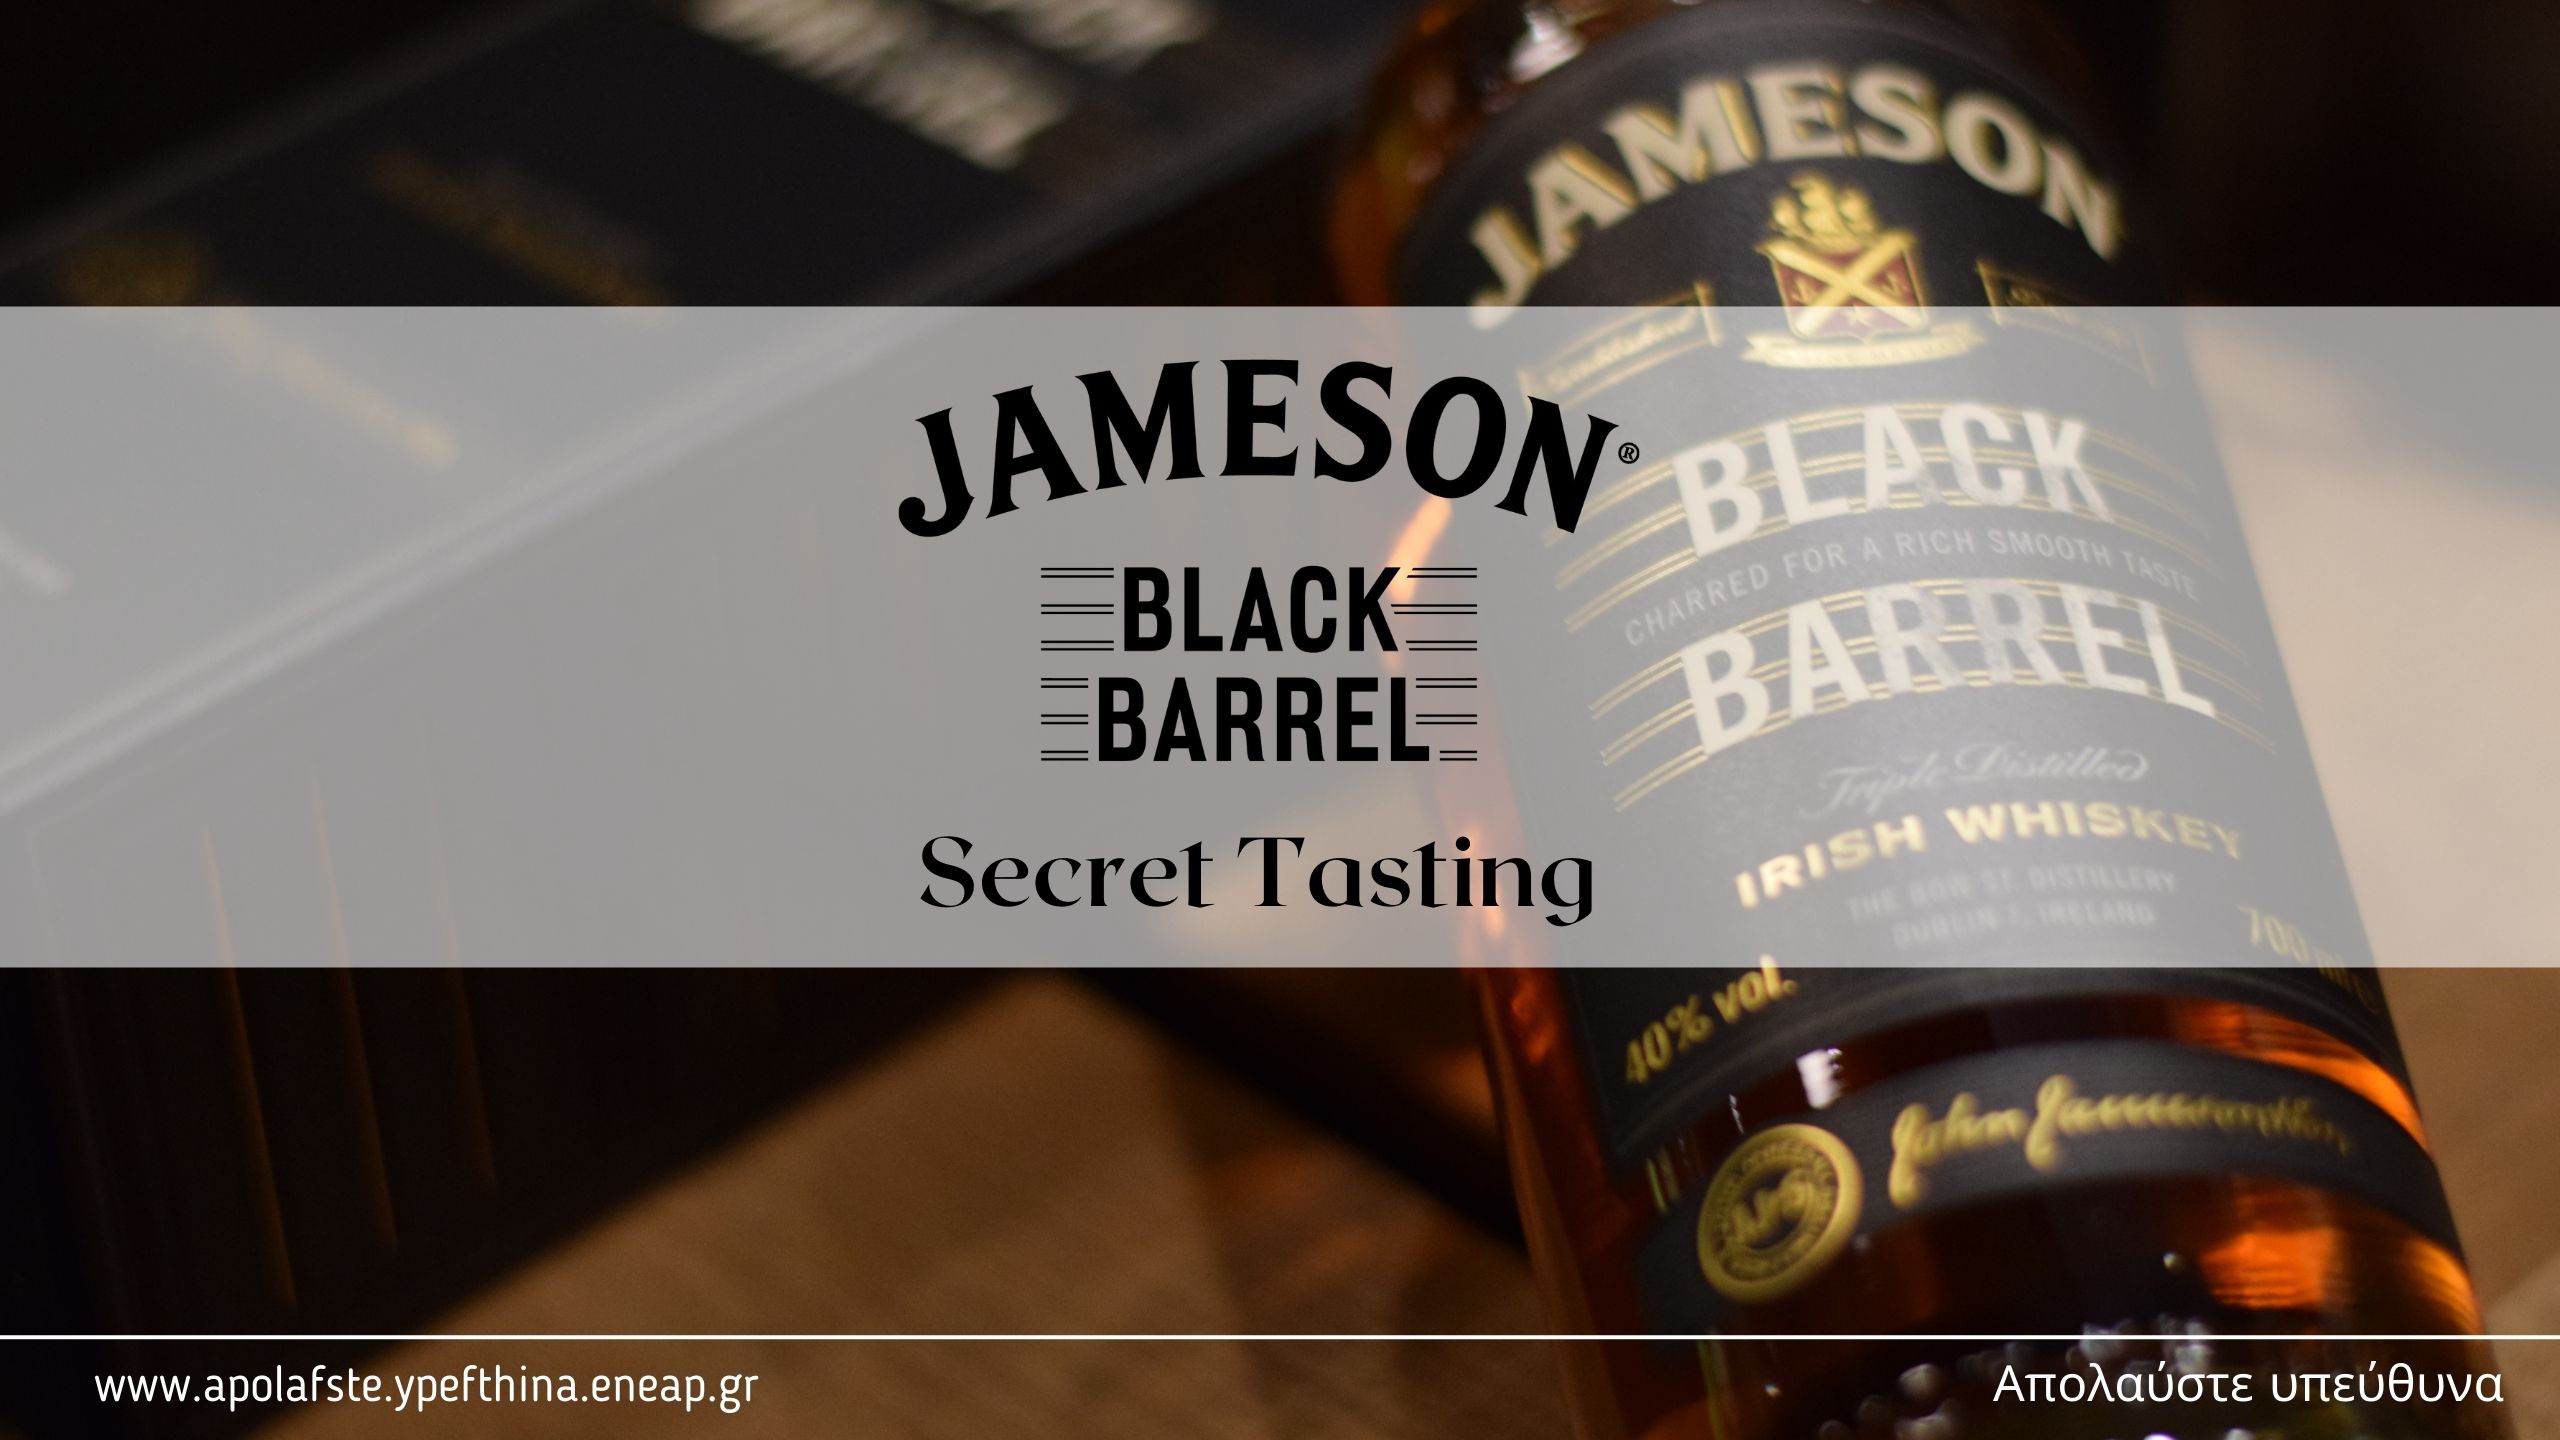 You are currently viewing Jameson Black Barrel Secret Tasting at the Jameson Shelter